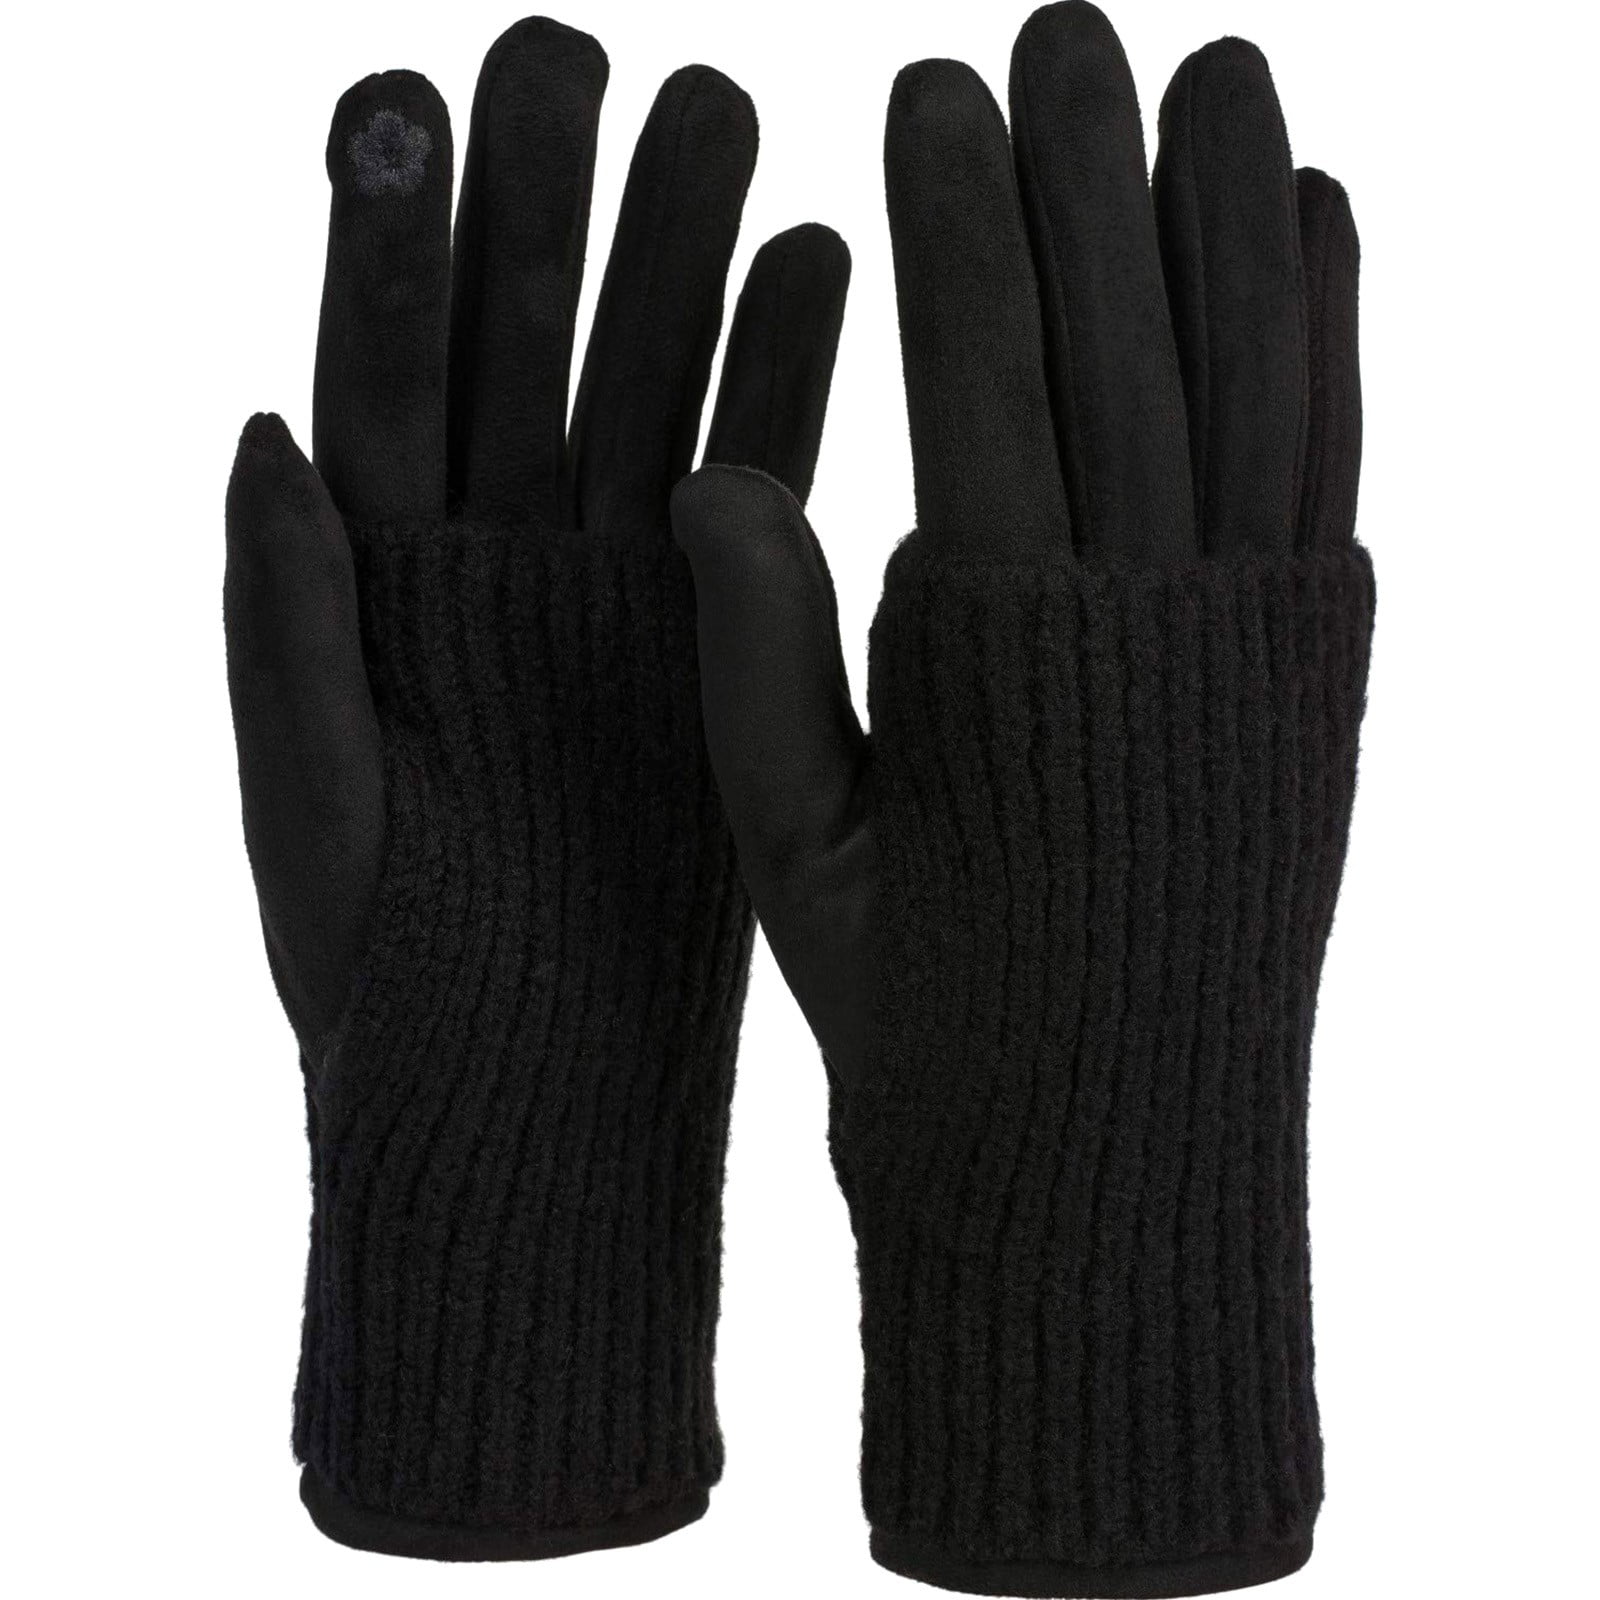 Best Gift! UEGEQU Women'S Touchscreen Fabric Gloves with Removable ...